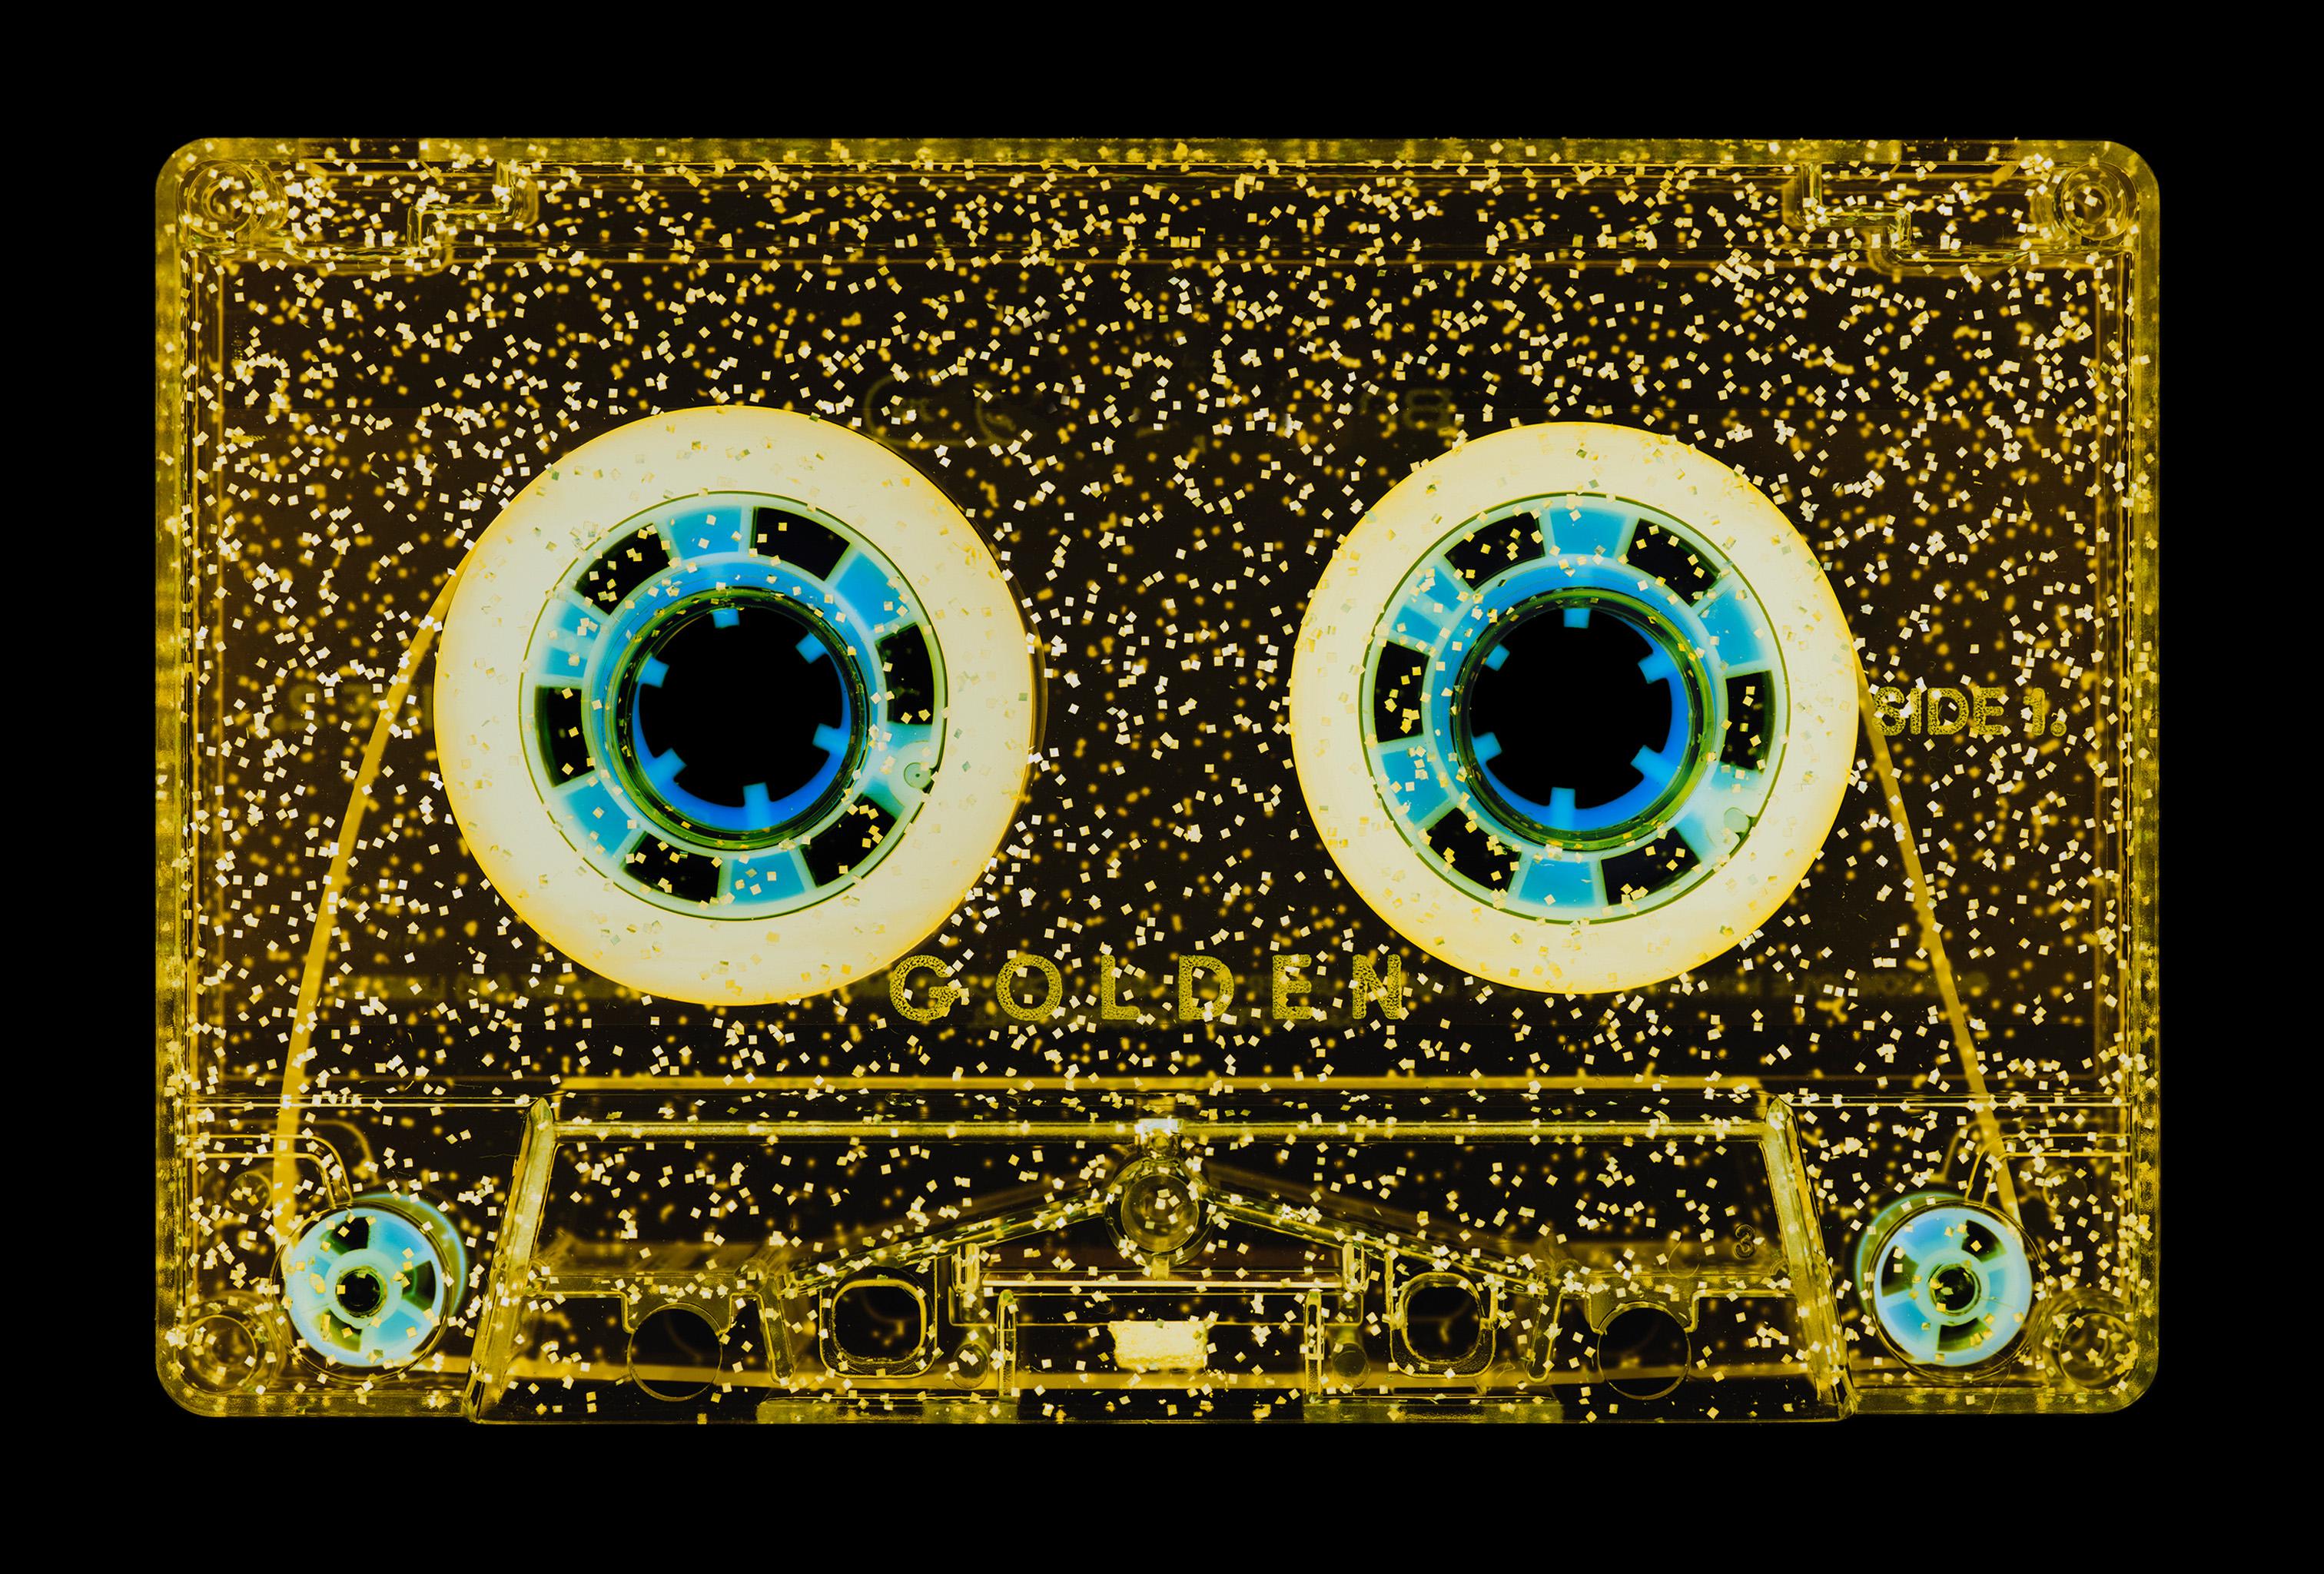 Tape Collection, All That Glitters is Golden - Pop Art Photography